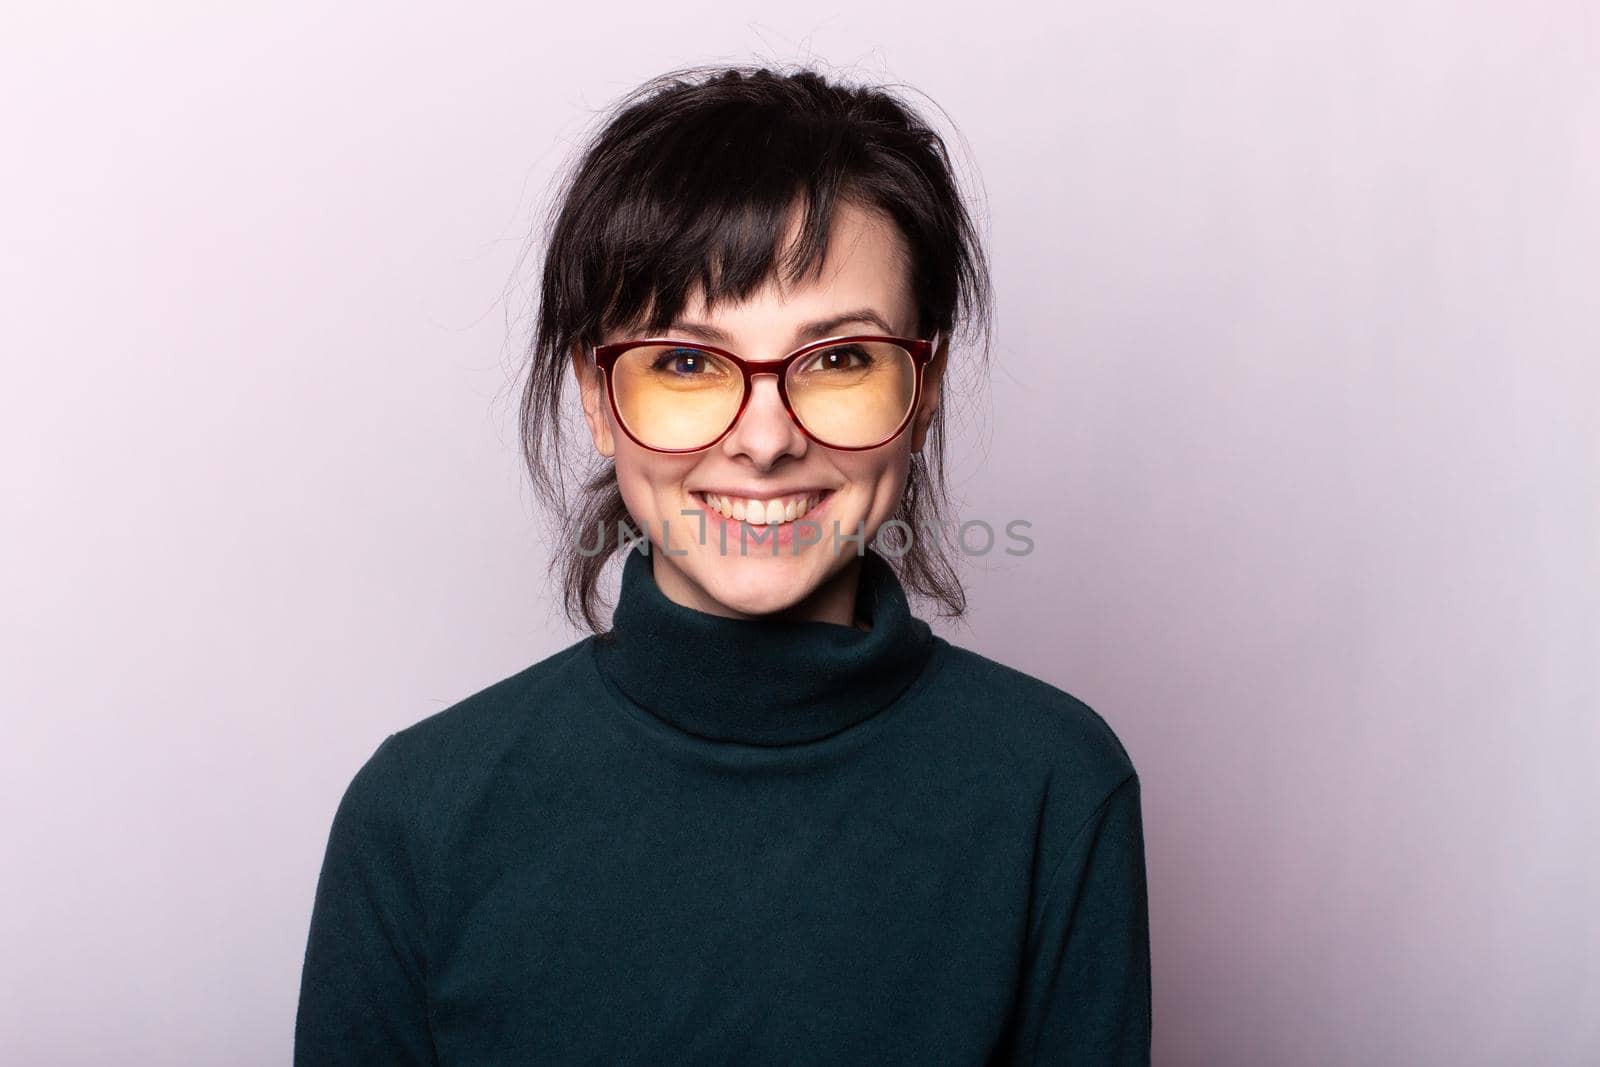 woman in a green turtleneck, glasses, portrait on a gray background. High quality photo